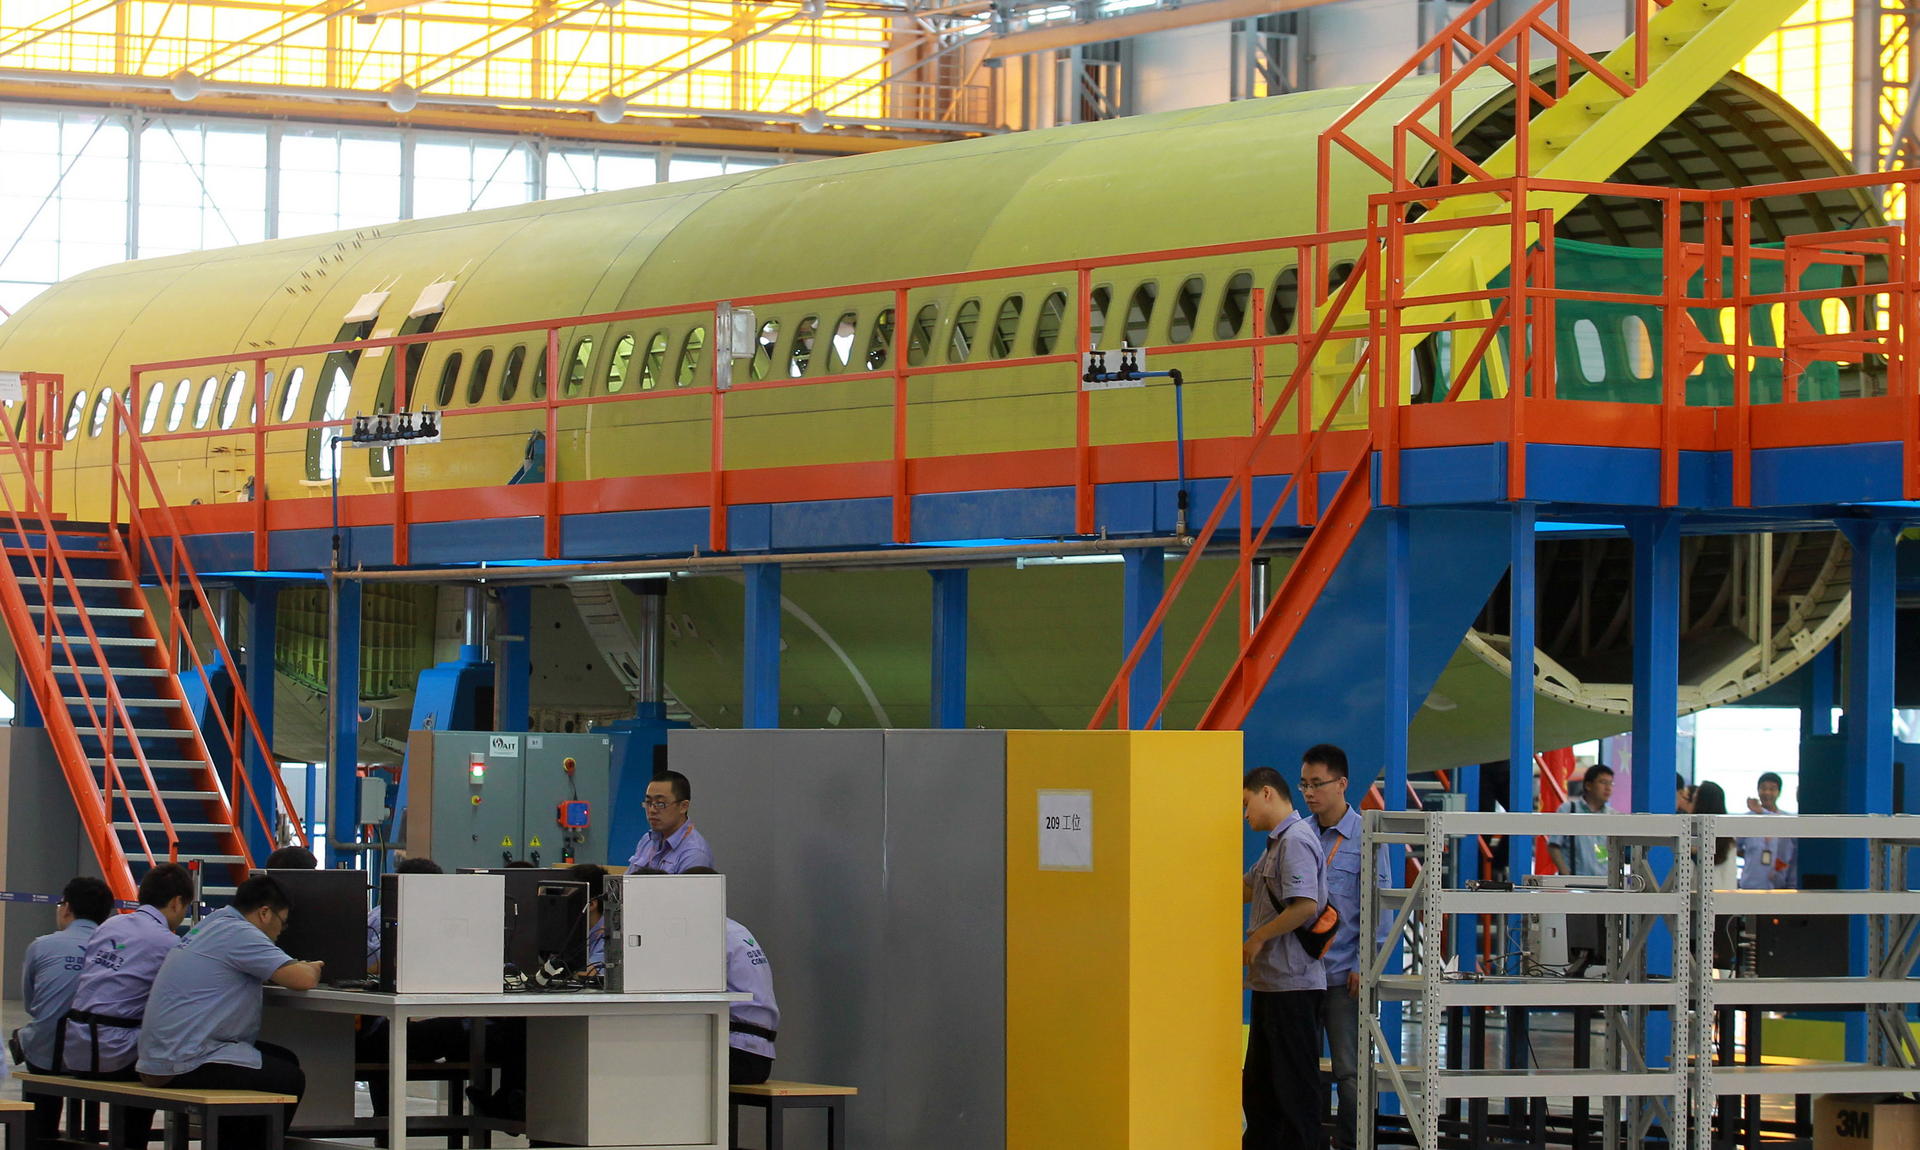 The C919 currently under development by Comac is a narrow-body version. The firm is now seeking suppliers to develop a widebody passenger plane. Photo: Xinhua